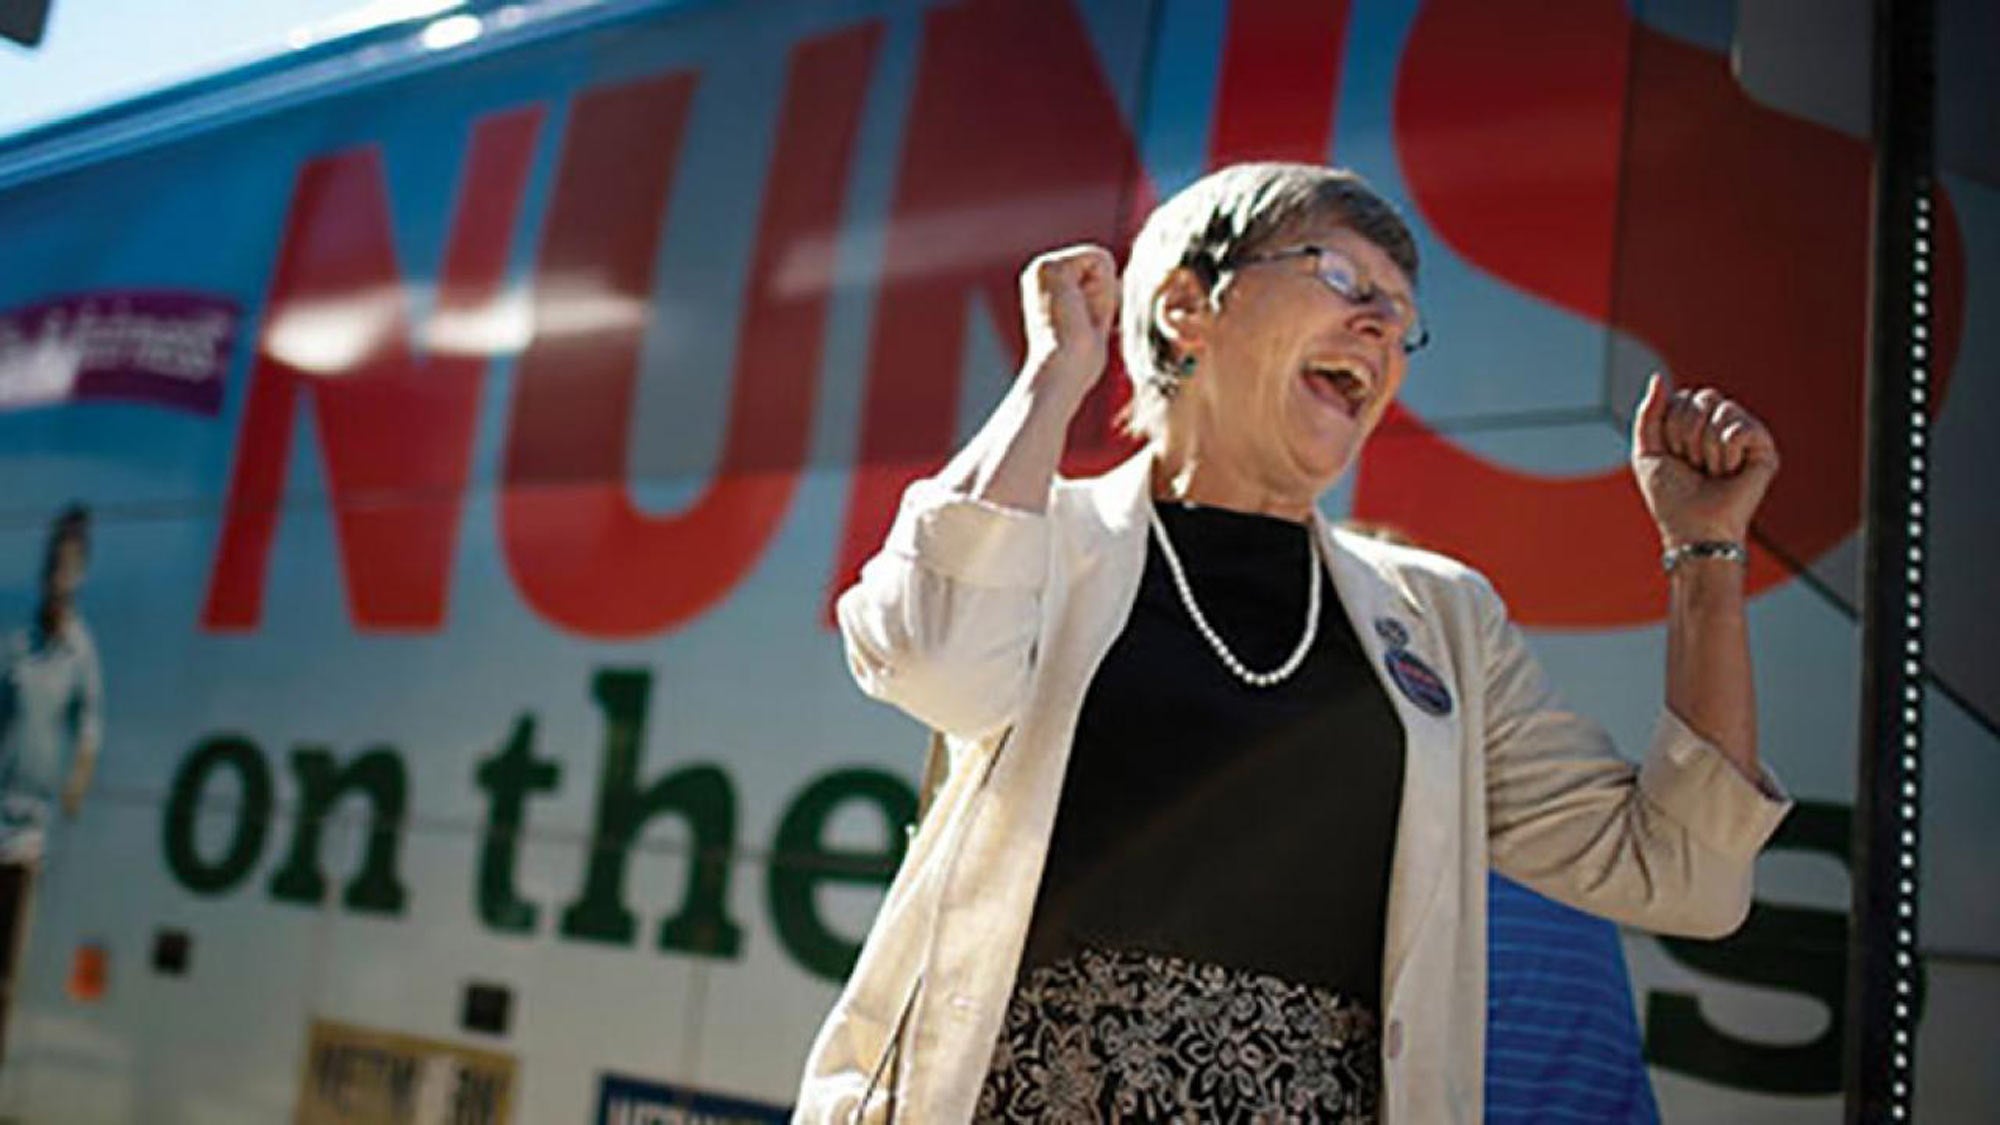 Smiling woman raises arms in triumph outside bus with sign "Nuns on the Bus" 